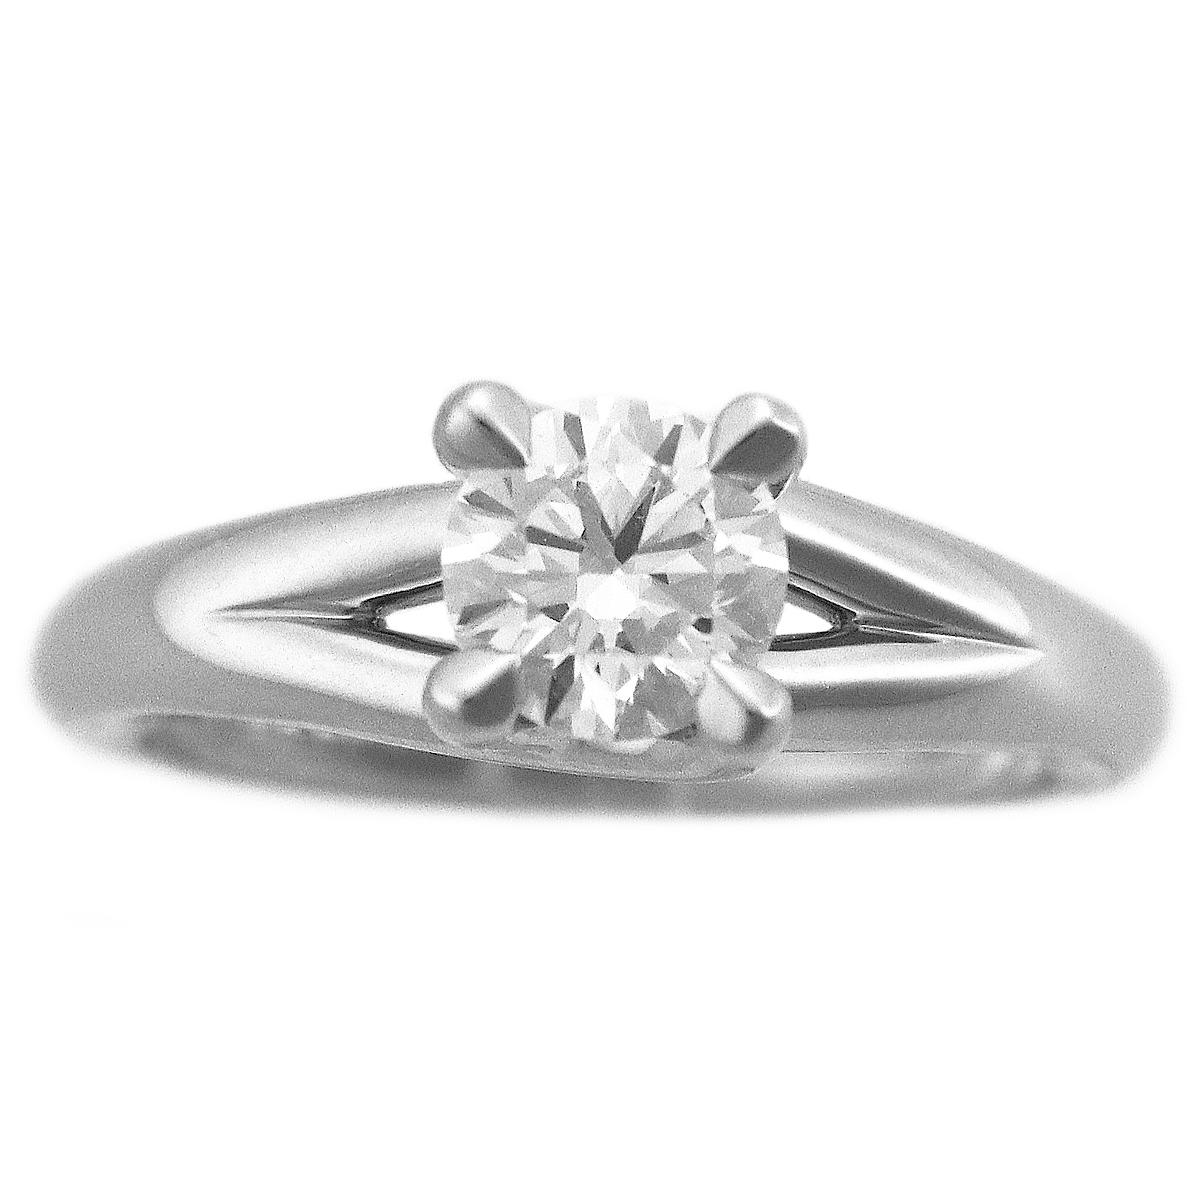 Brand: CHAUMET
Name:Liens Ring
Material :1P Diamond (D0.70ct E-VS1-VG), PT950 Platinum
Comes with:Chaumet box, case, GIA certificate (Jun 2008)
Ring size:British & Australian:H 1/2  /   US & Canada:4  /  French & Russian:47 /  German:15 /  Japanese: